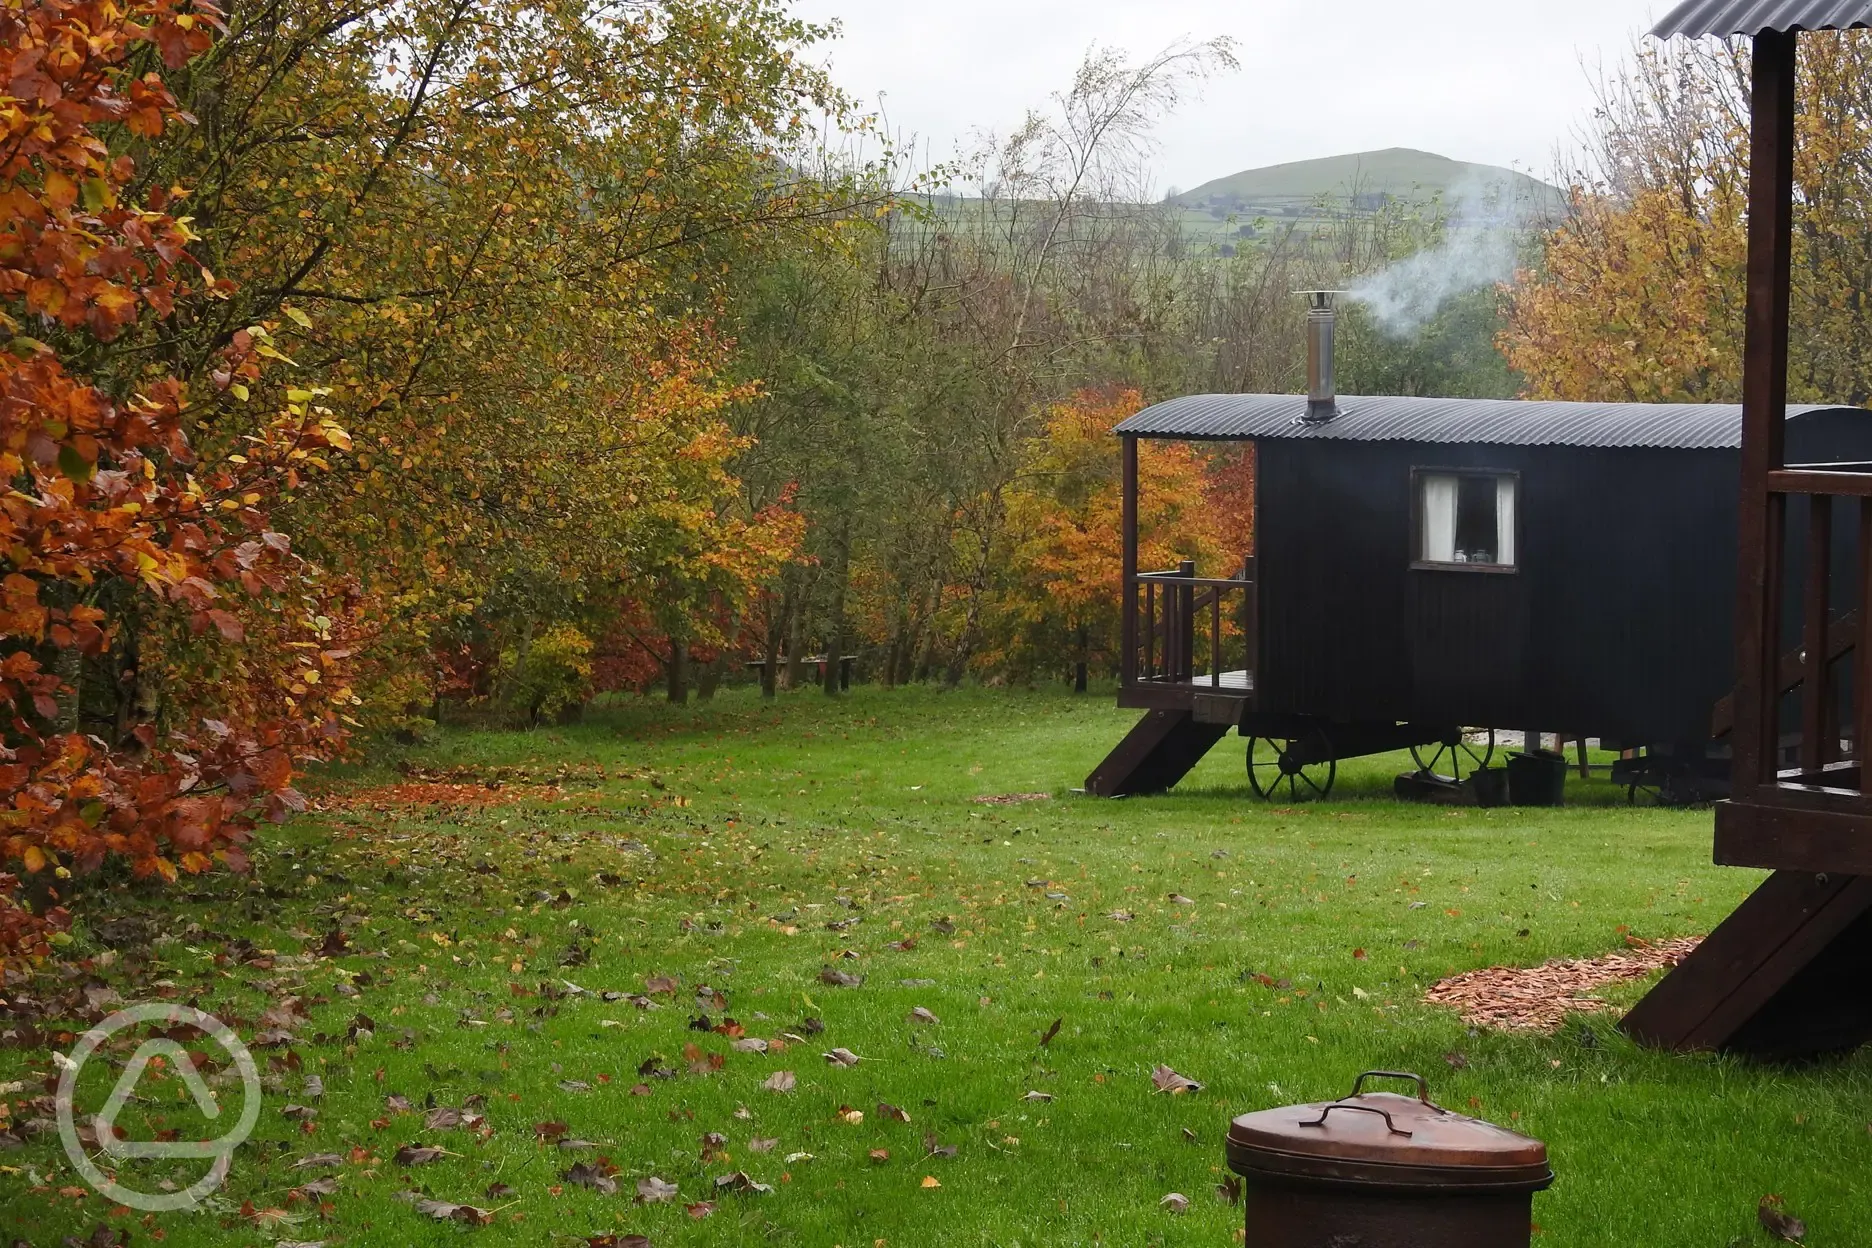 Shepherd's huts with woodland and countryside views